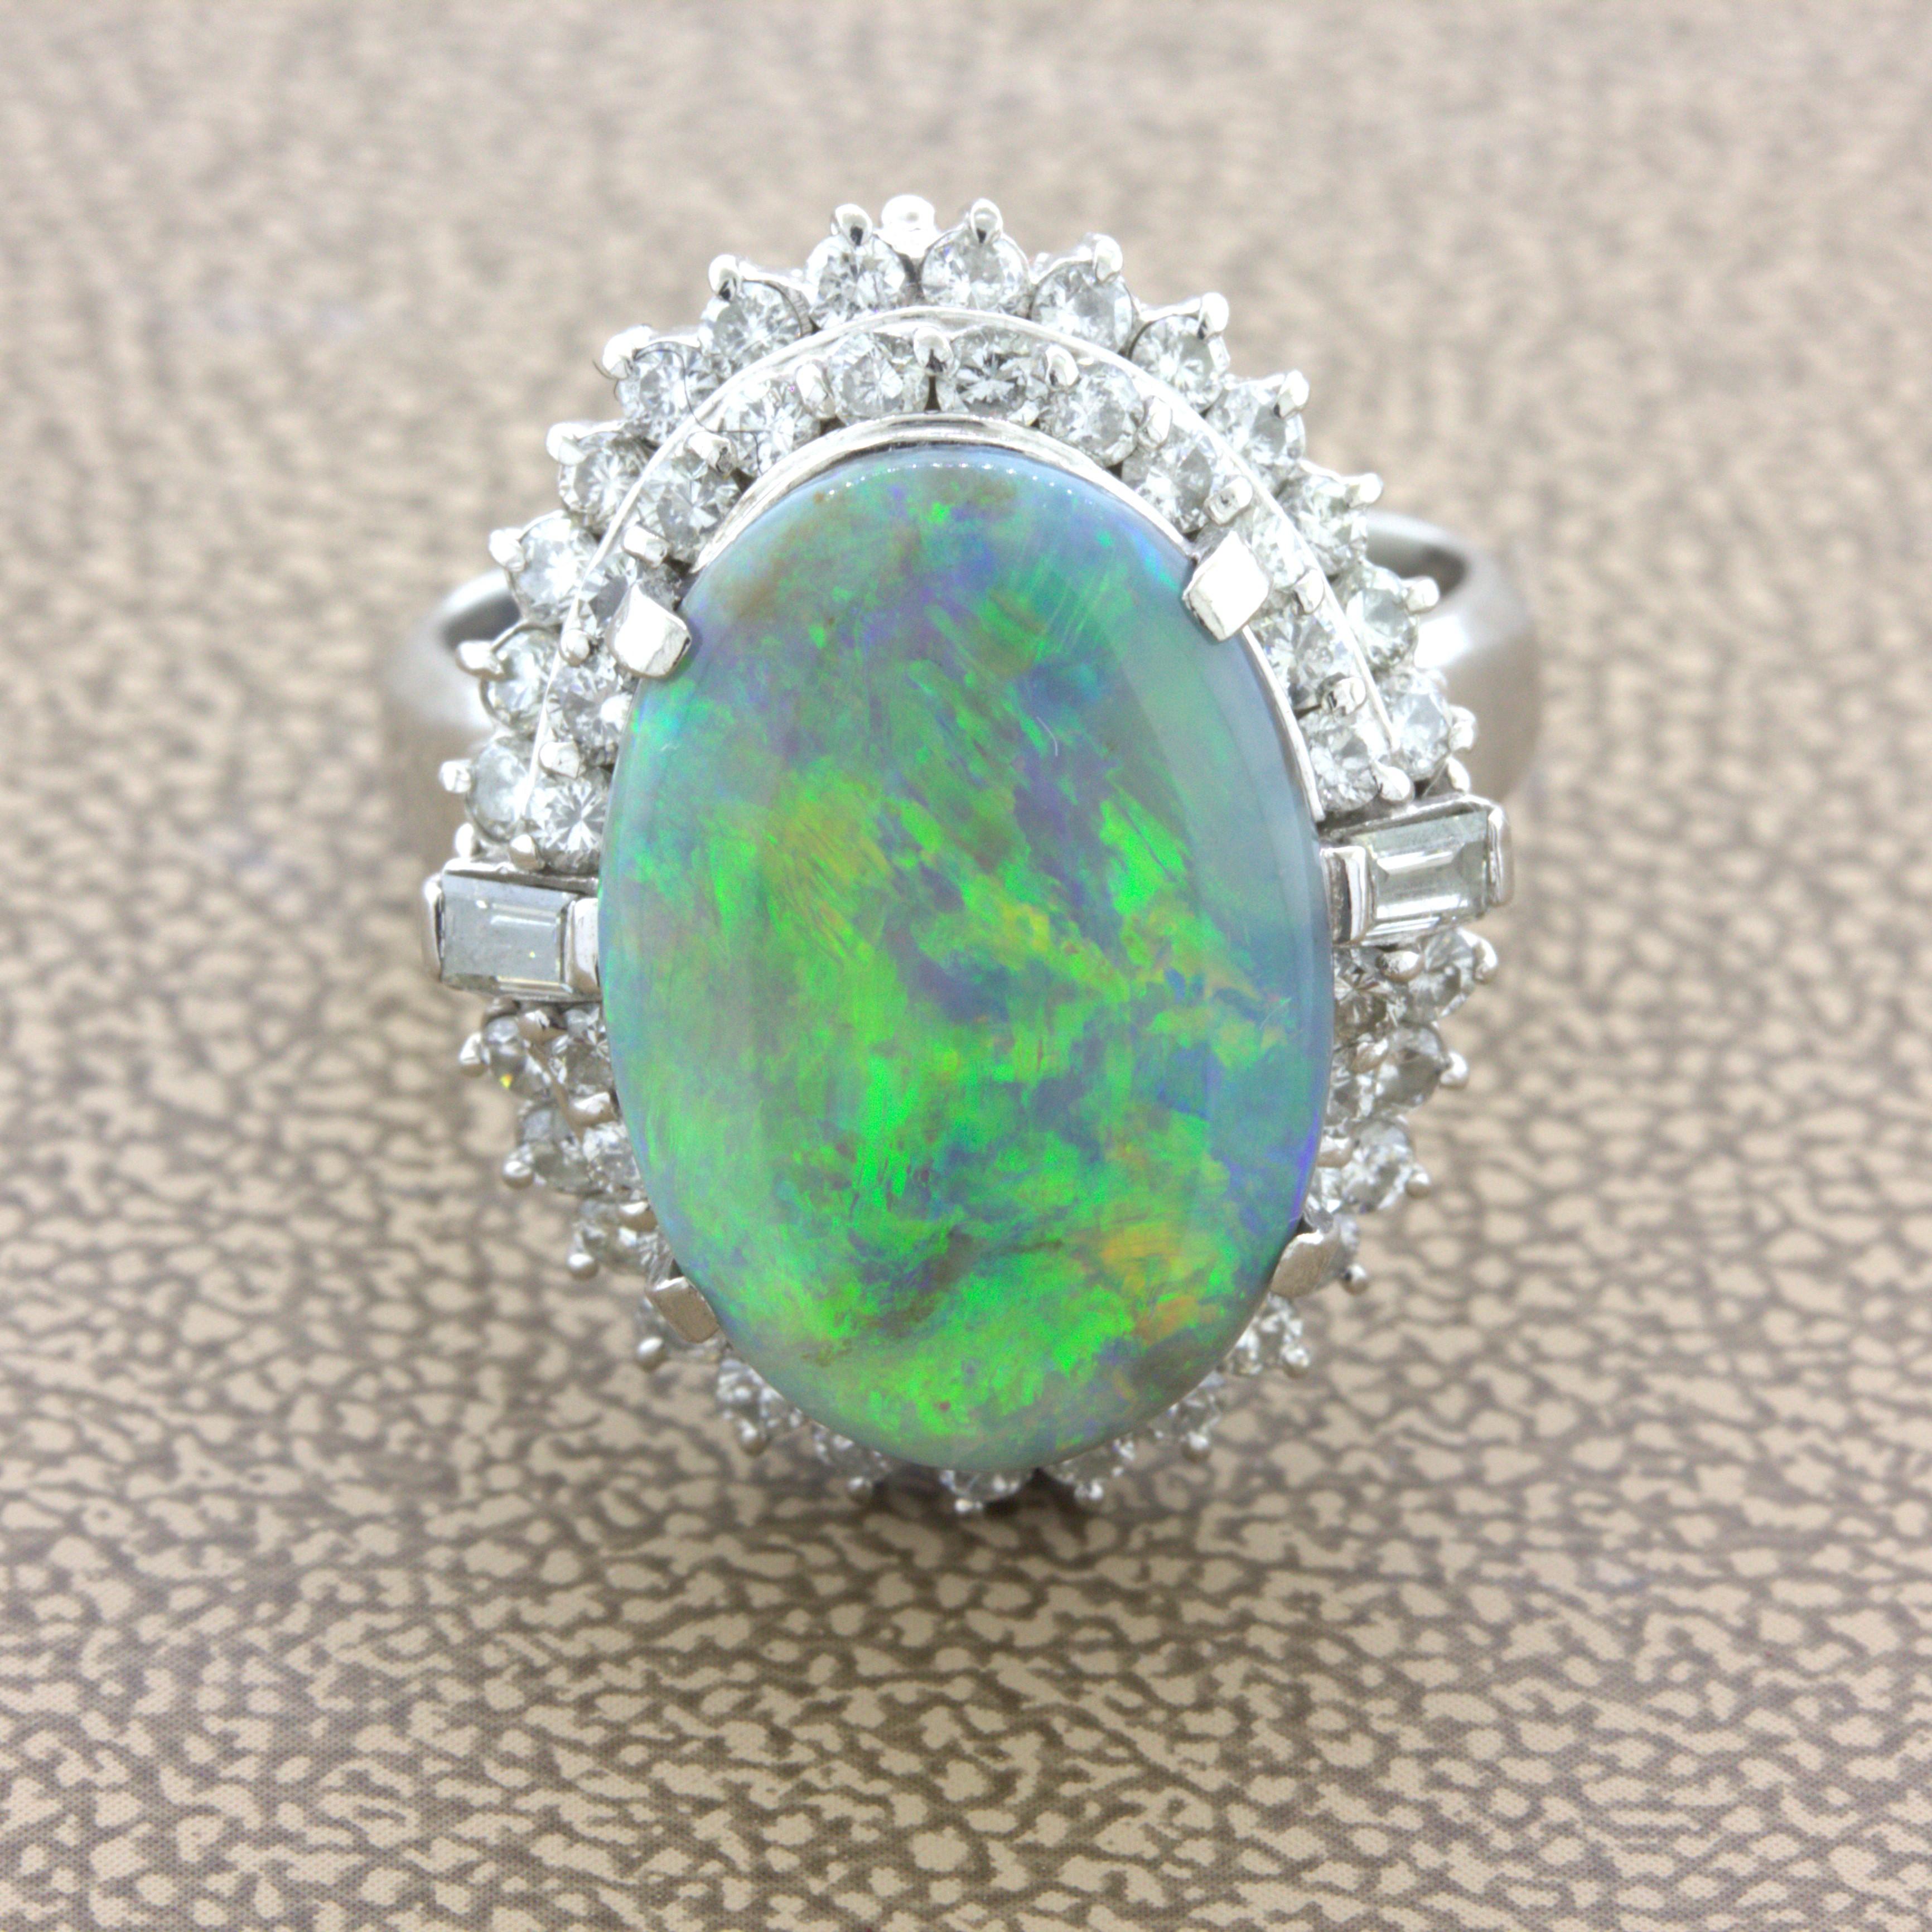 A chic and elegant ring featuring a natural Australian black opal. It weighs 4.10 carats and has very good play-of-color as flashes of orange, green, yellow, and blue can be seen as the stone is moved in the light. It is complemented by 1.10 carats